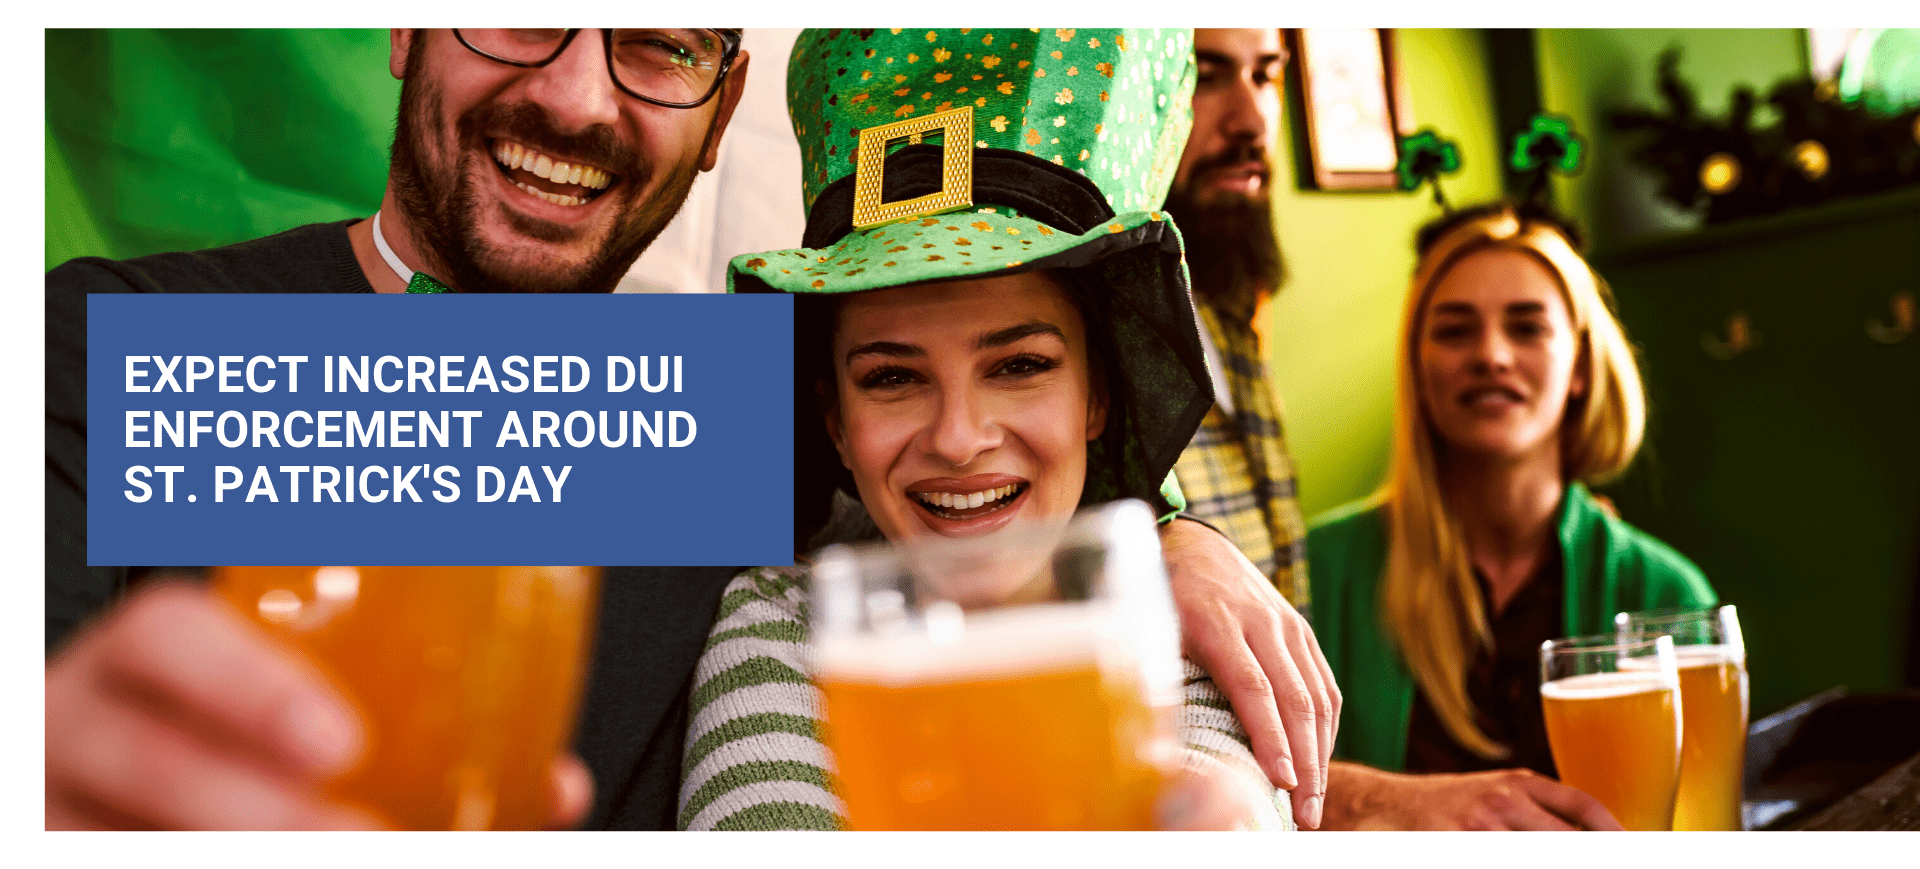 Expect Increased DUI Enforcement around St. Patrick’s Day